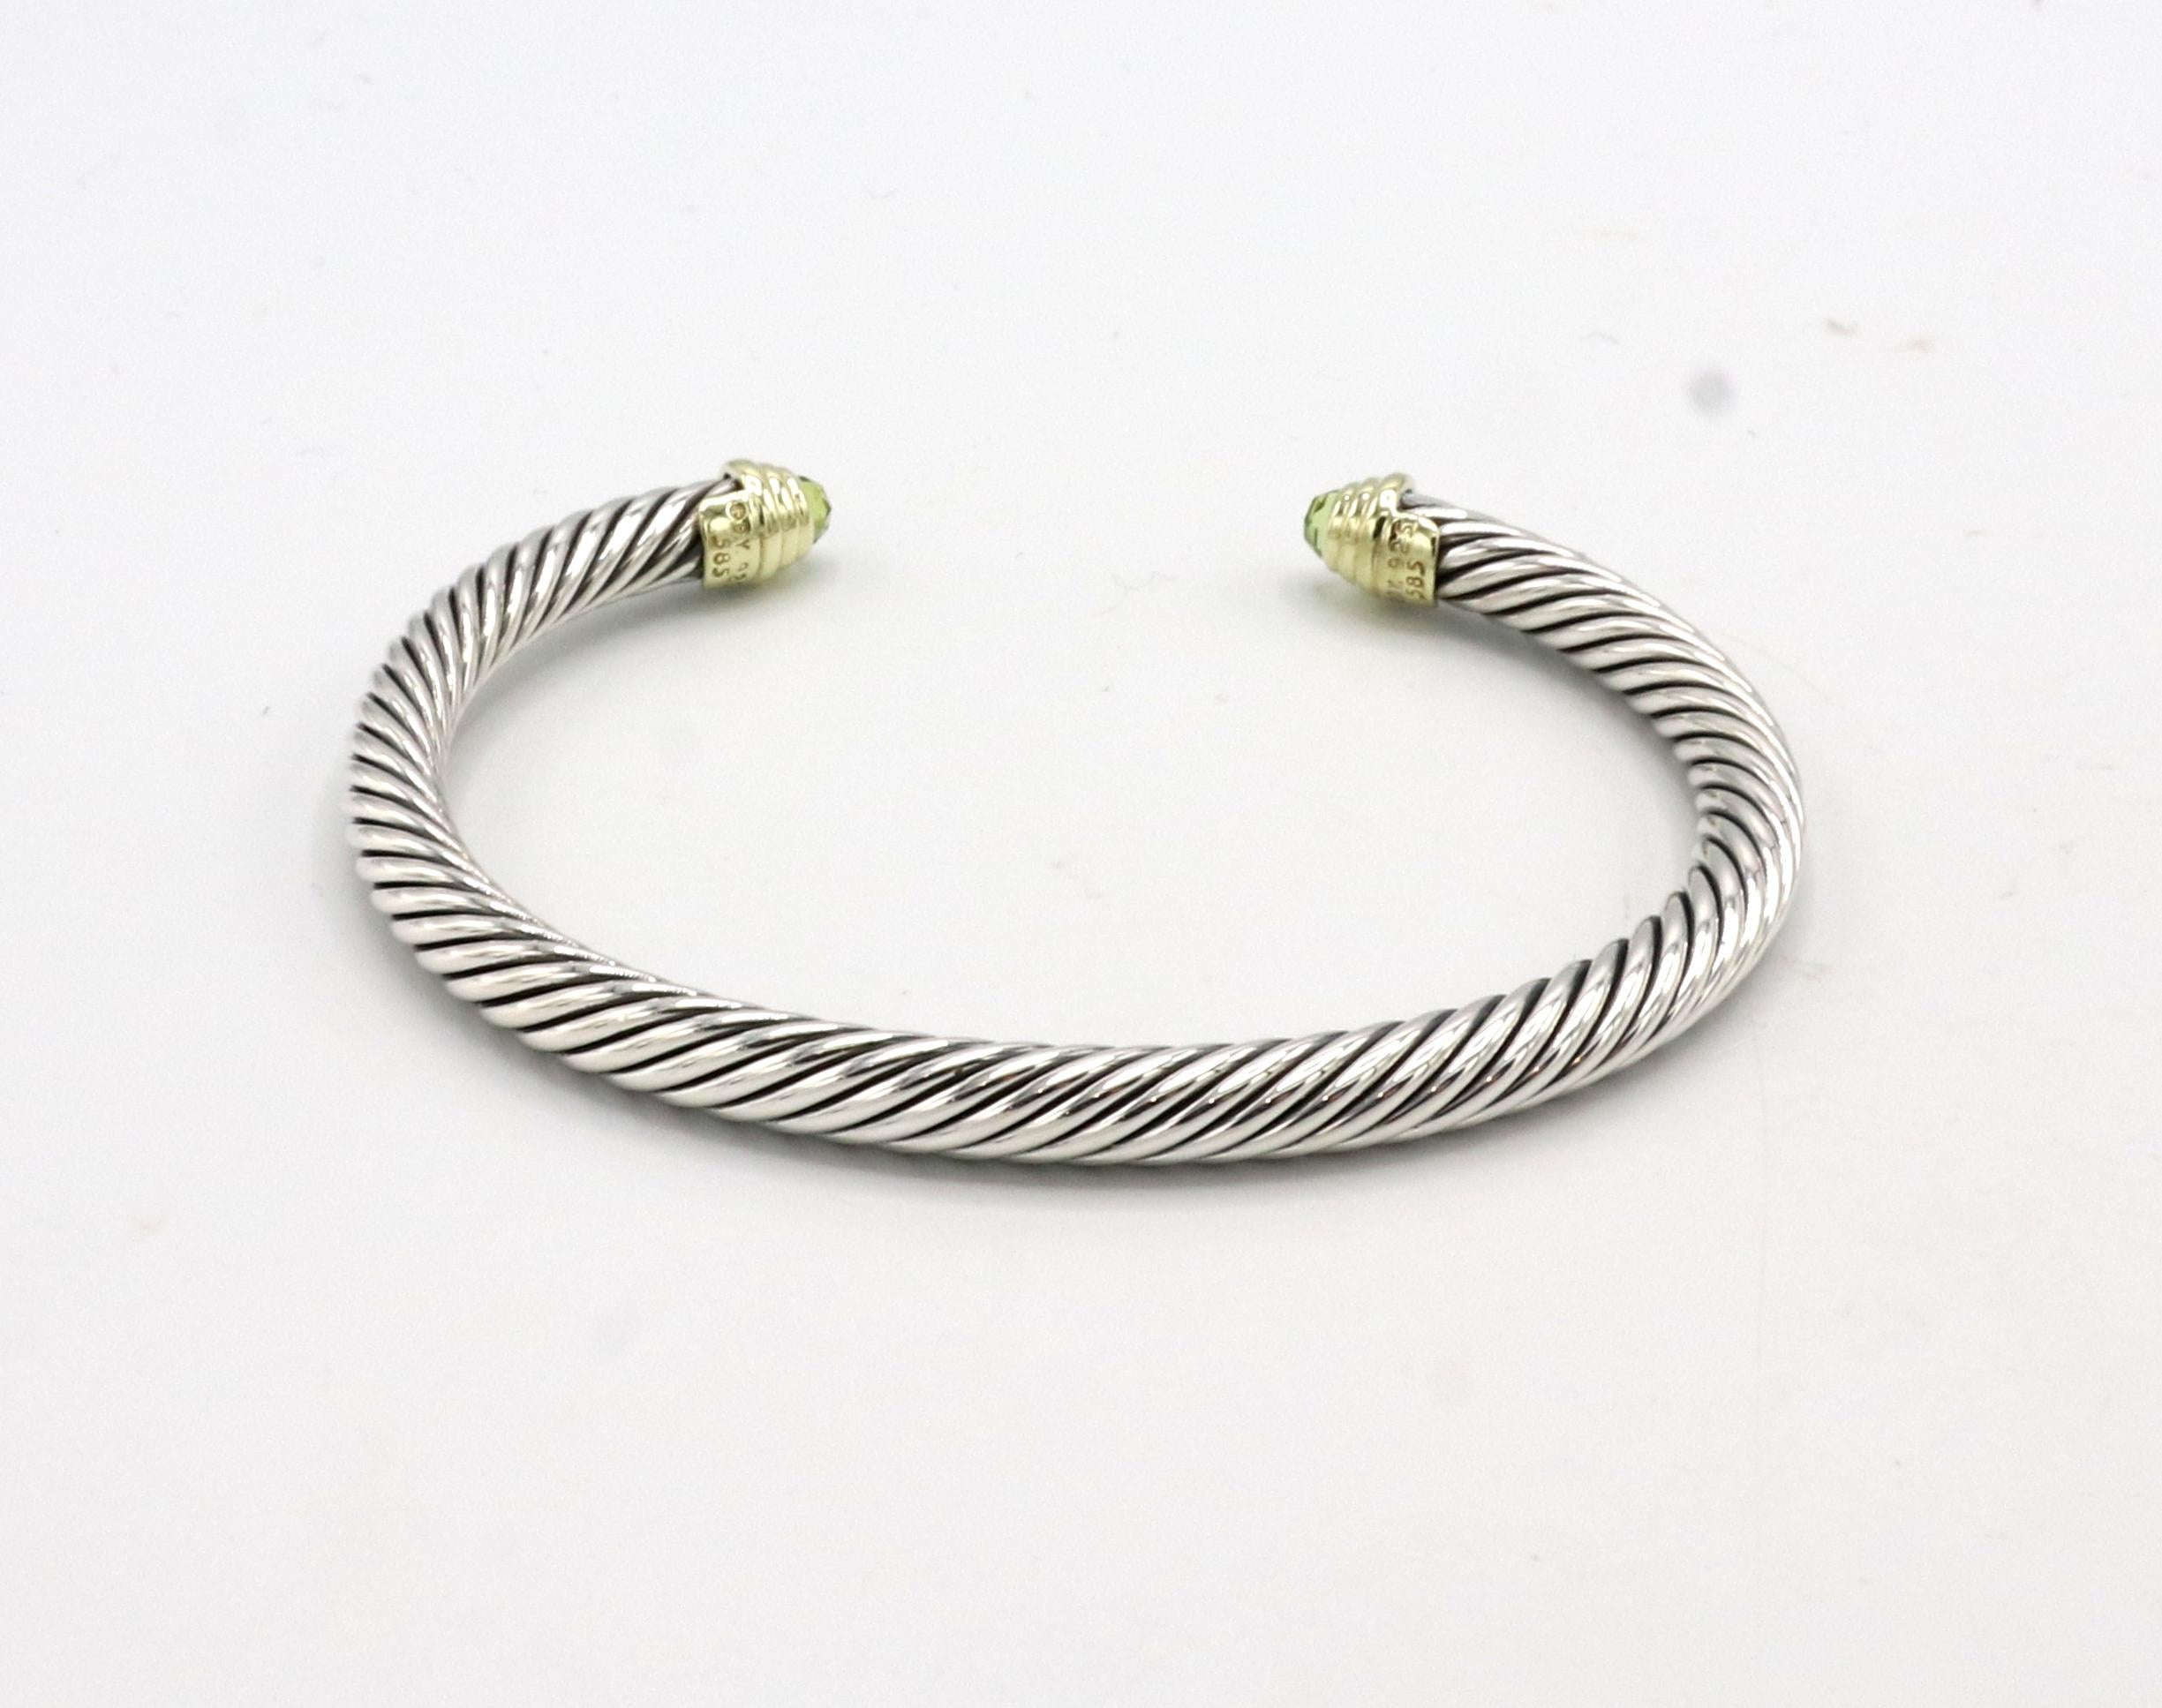 David Yurman Cable Classic Sterling Silver & Gold Peridot Bangle Bracelet 
Metal: Sterling silver & 14k yellow gold
Weight: 26.19 grams
Width: 5mm
Circumference: Approx. 6.75 inches
Inside diameter: 60mm
Outside diameter: 68.5mm
Retail: $650